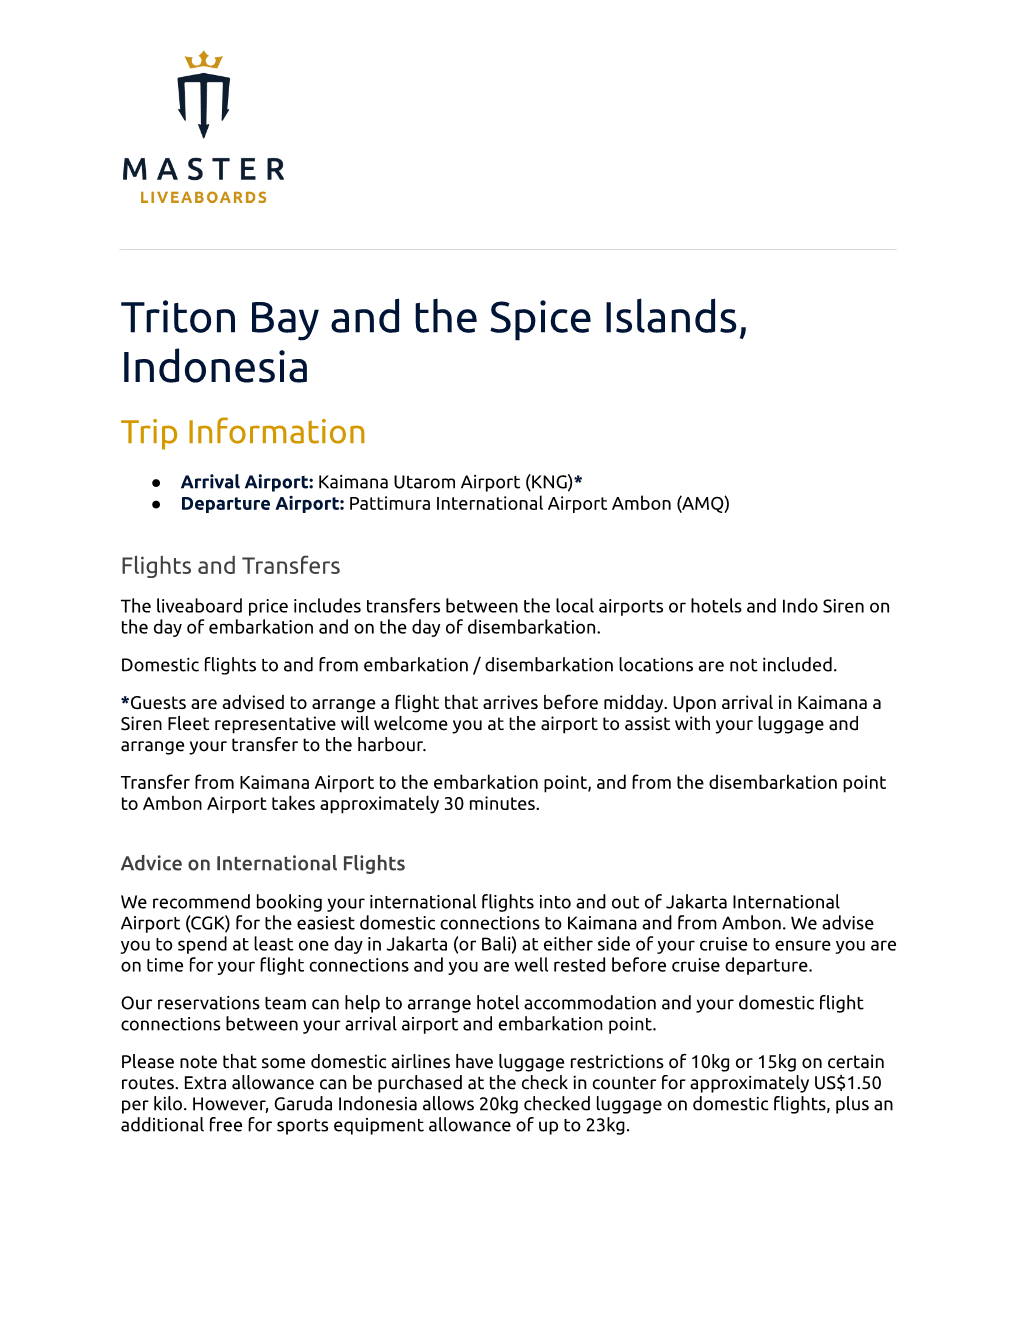 Triton Bay and the Spice Islands, Indonesia Trip Information